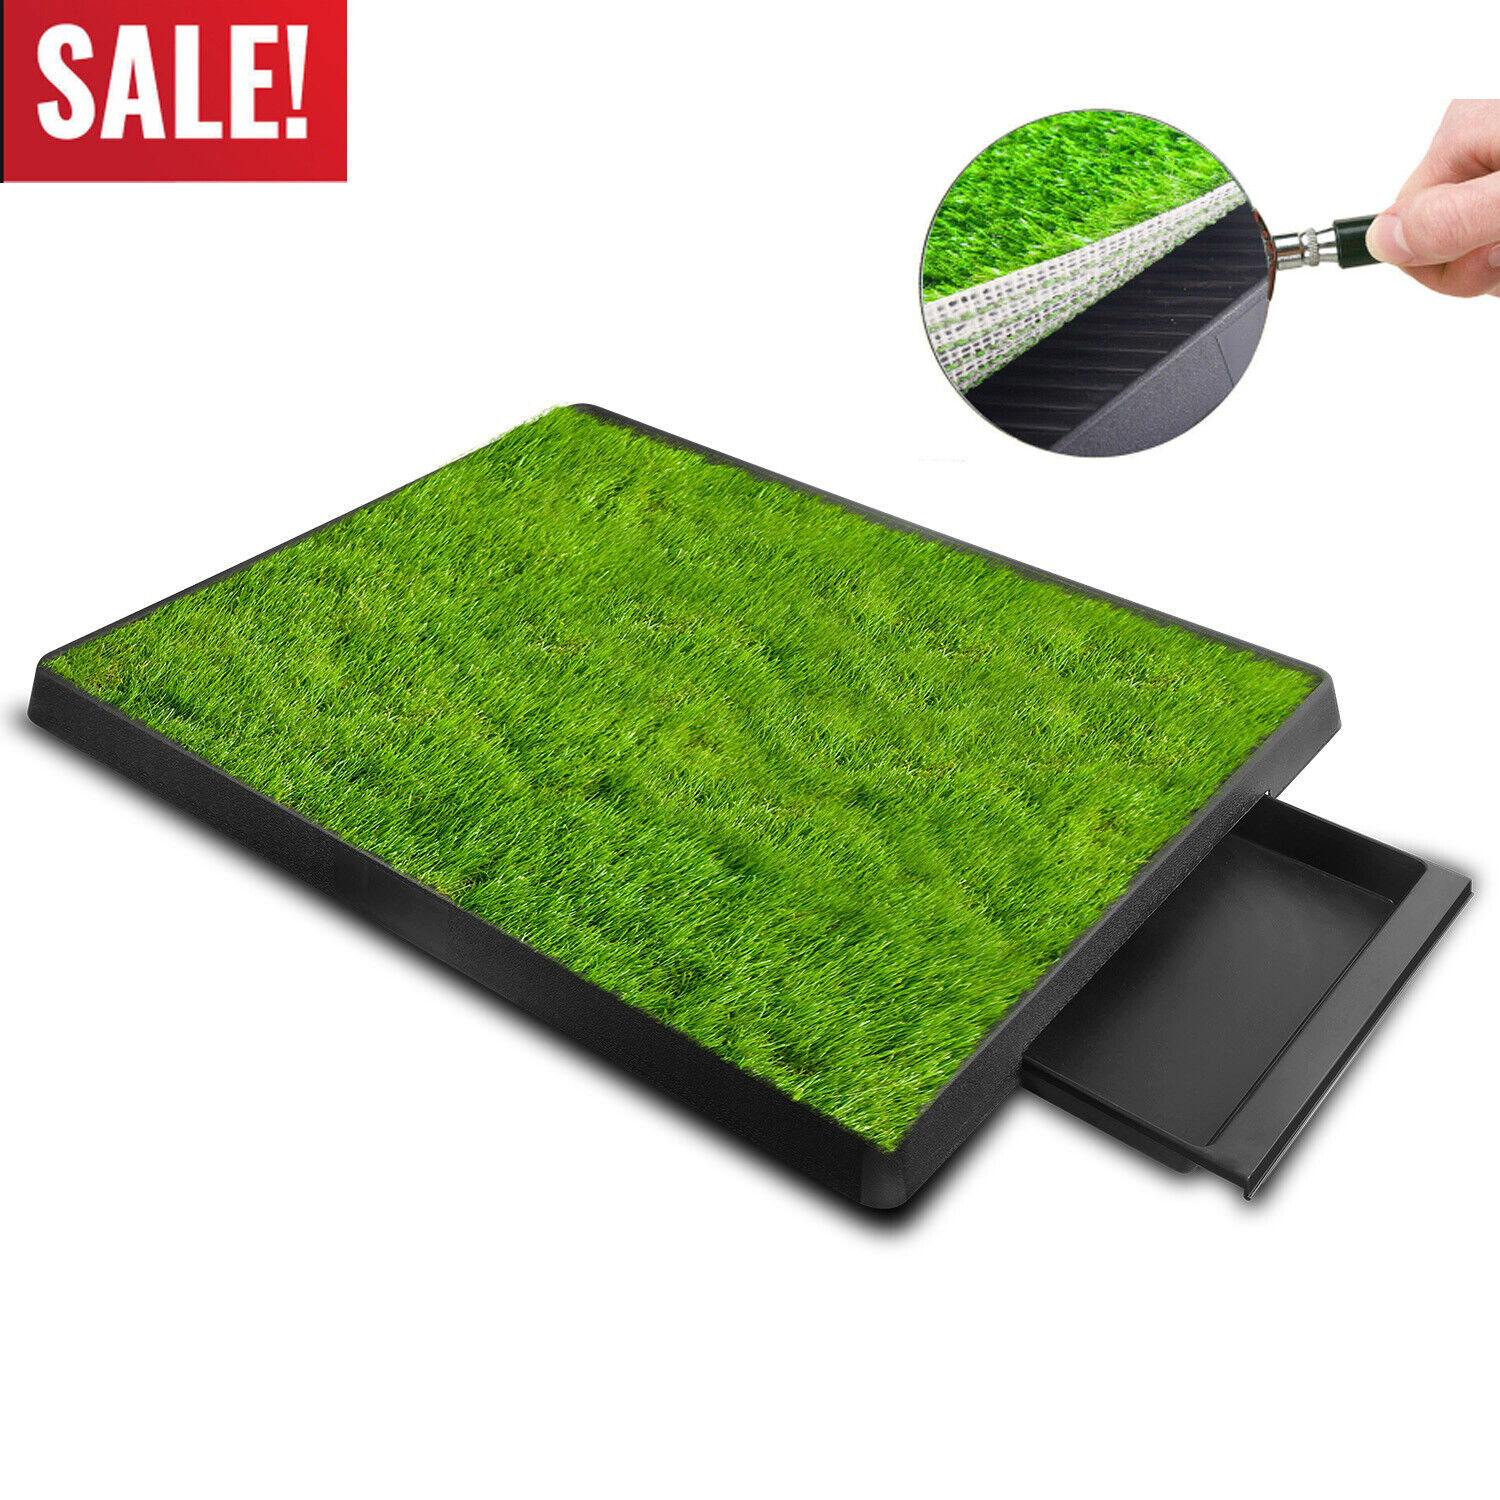 Indoor Puppy Dog Challenge the lowest price Pets Potty Training for shipfree Pad Pee Dogs Mat Grass